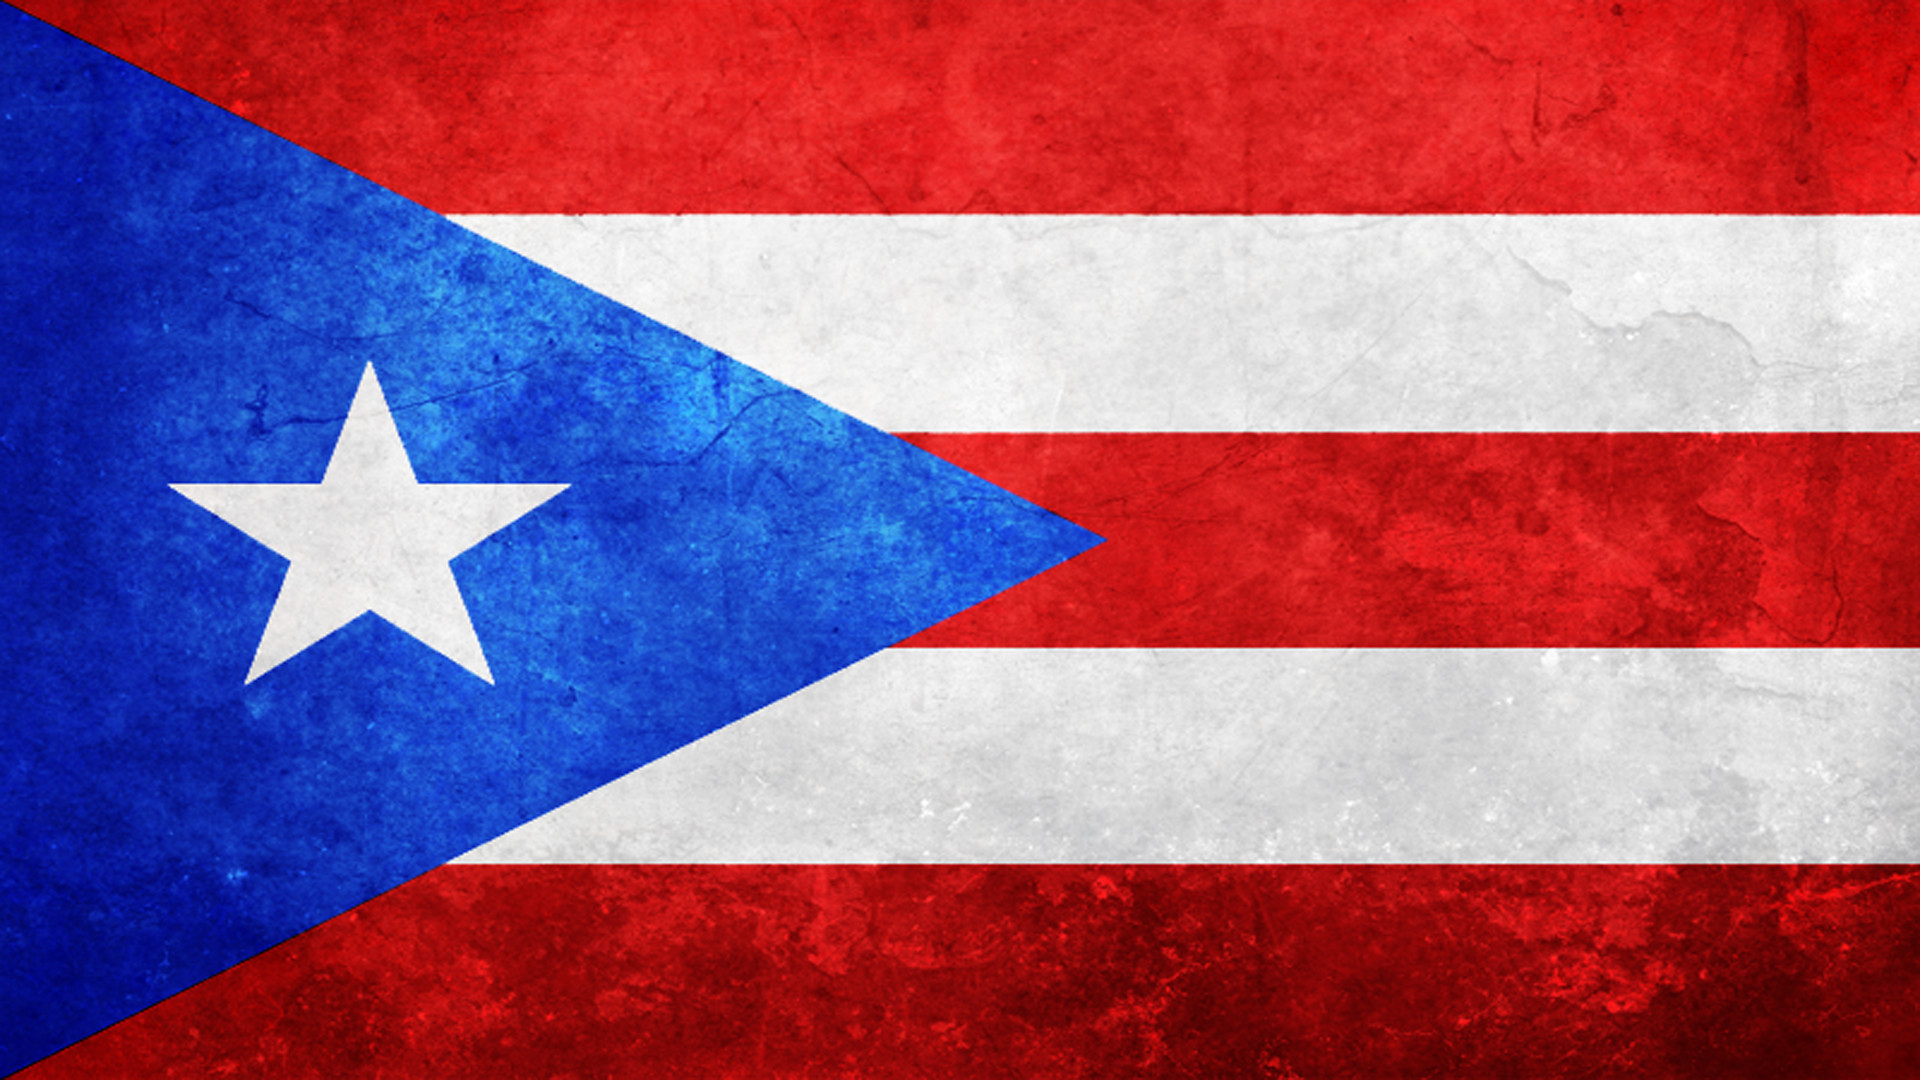 500 Puerto Rico Pictures HD  Download Free Images on Unsplash